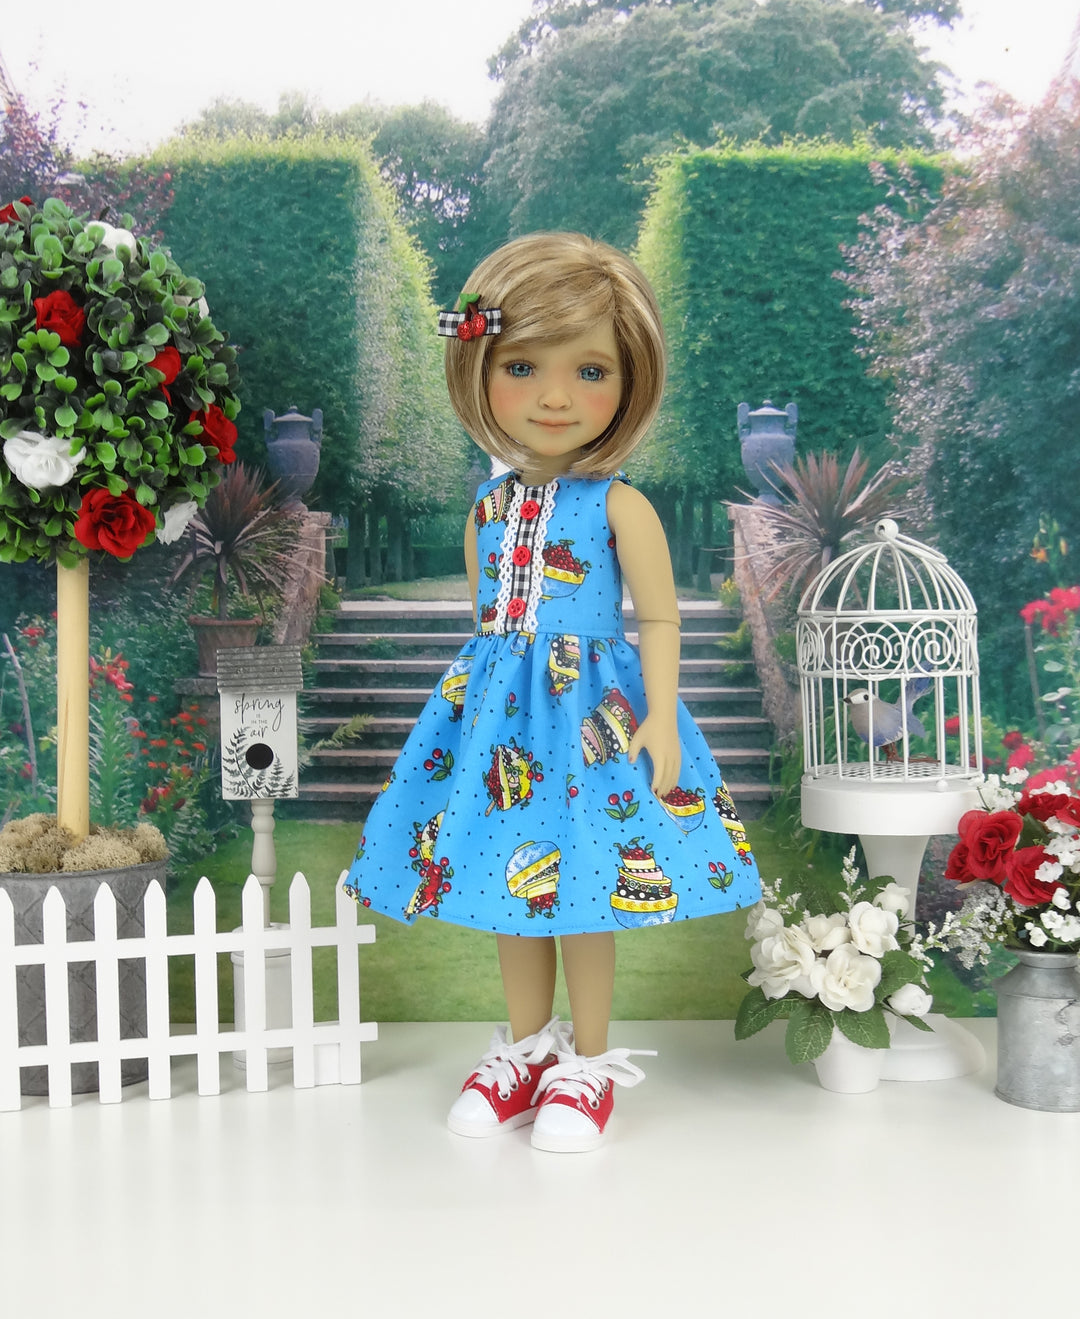 Bowl of Cherries - dress with shoes for Ruby Red Fashion Friends doll